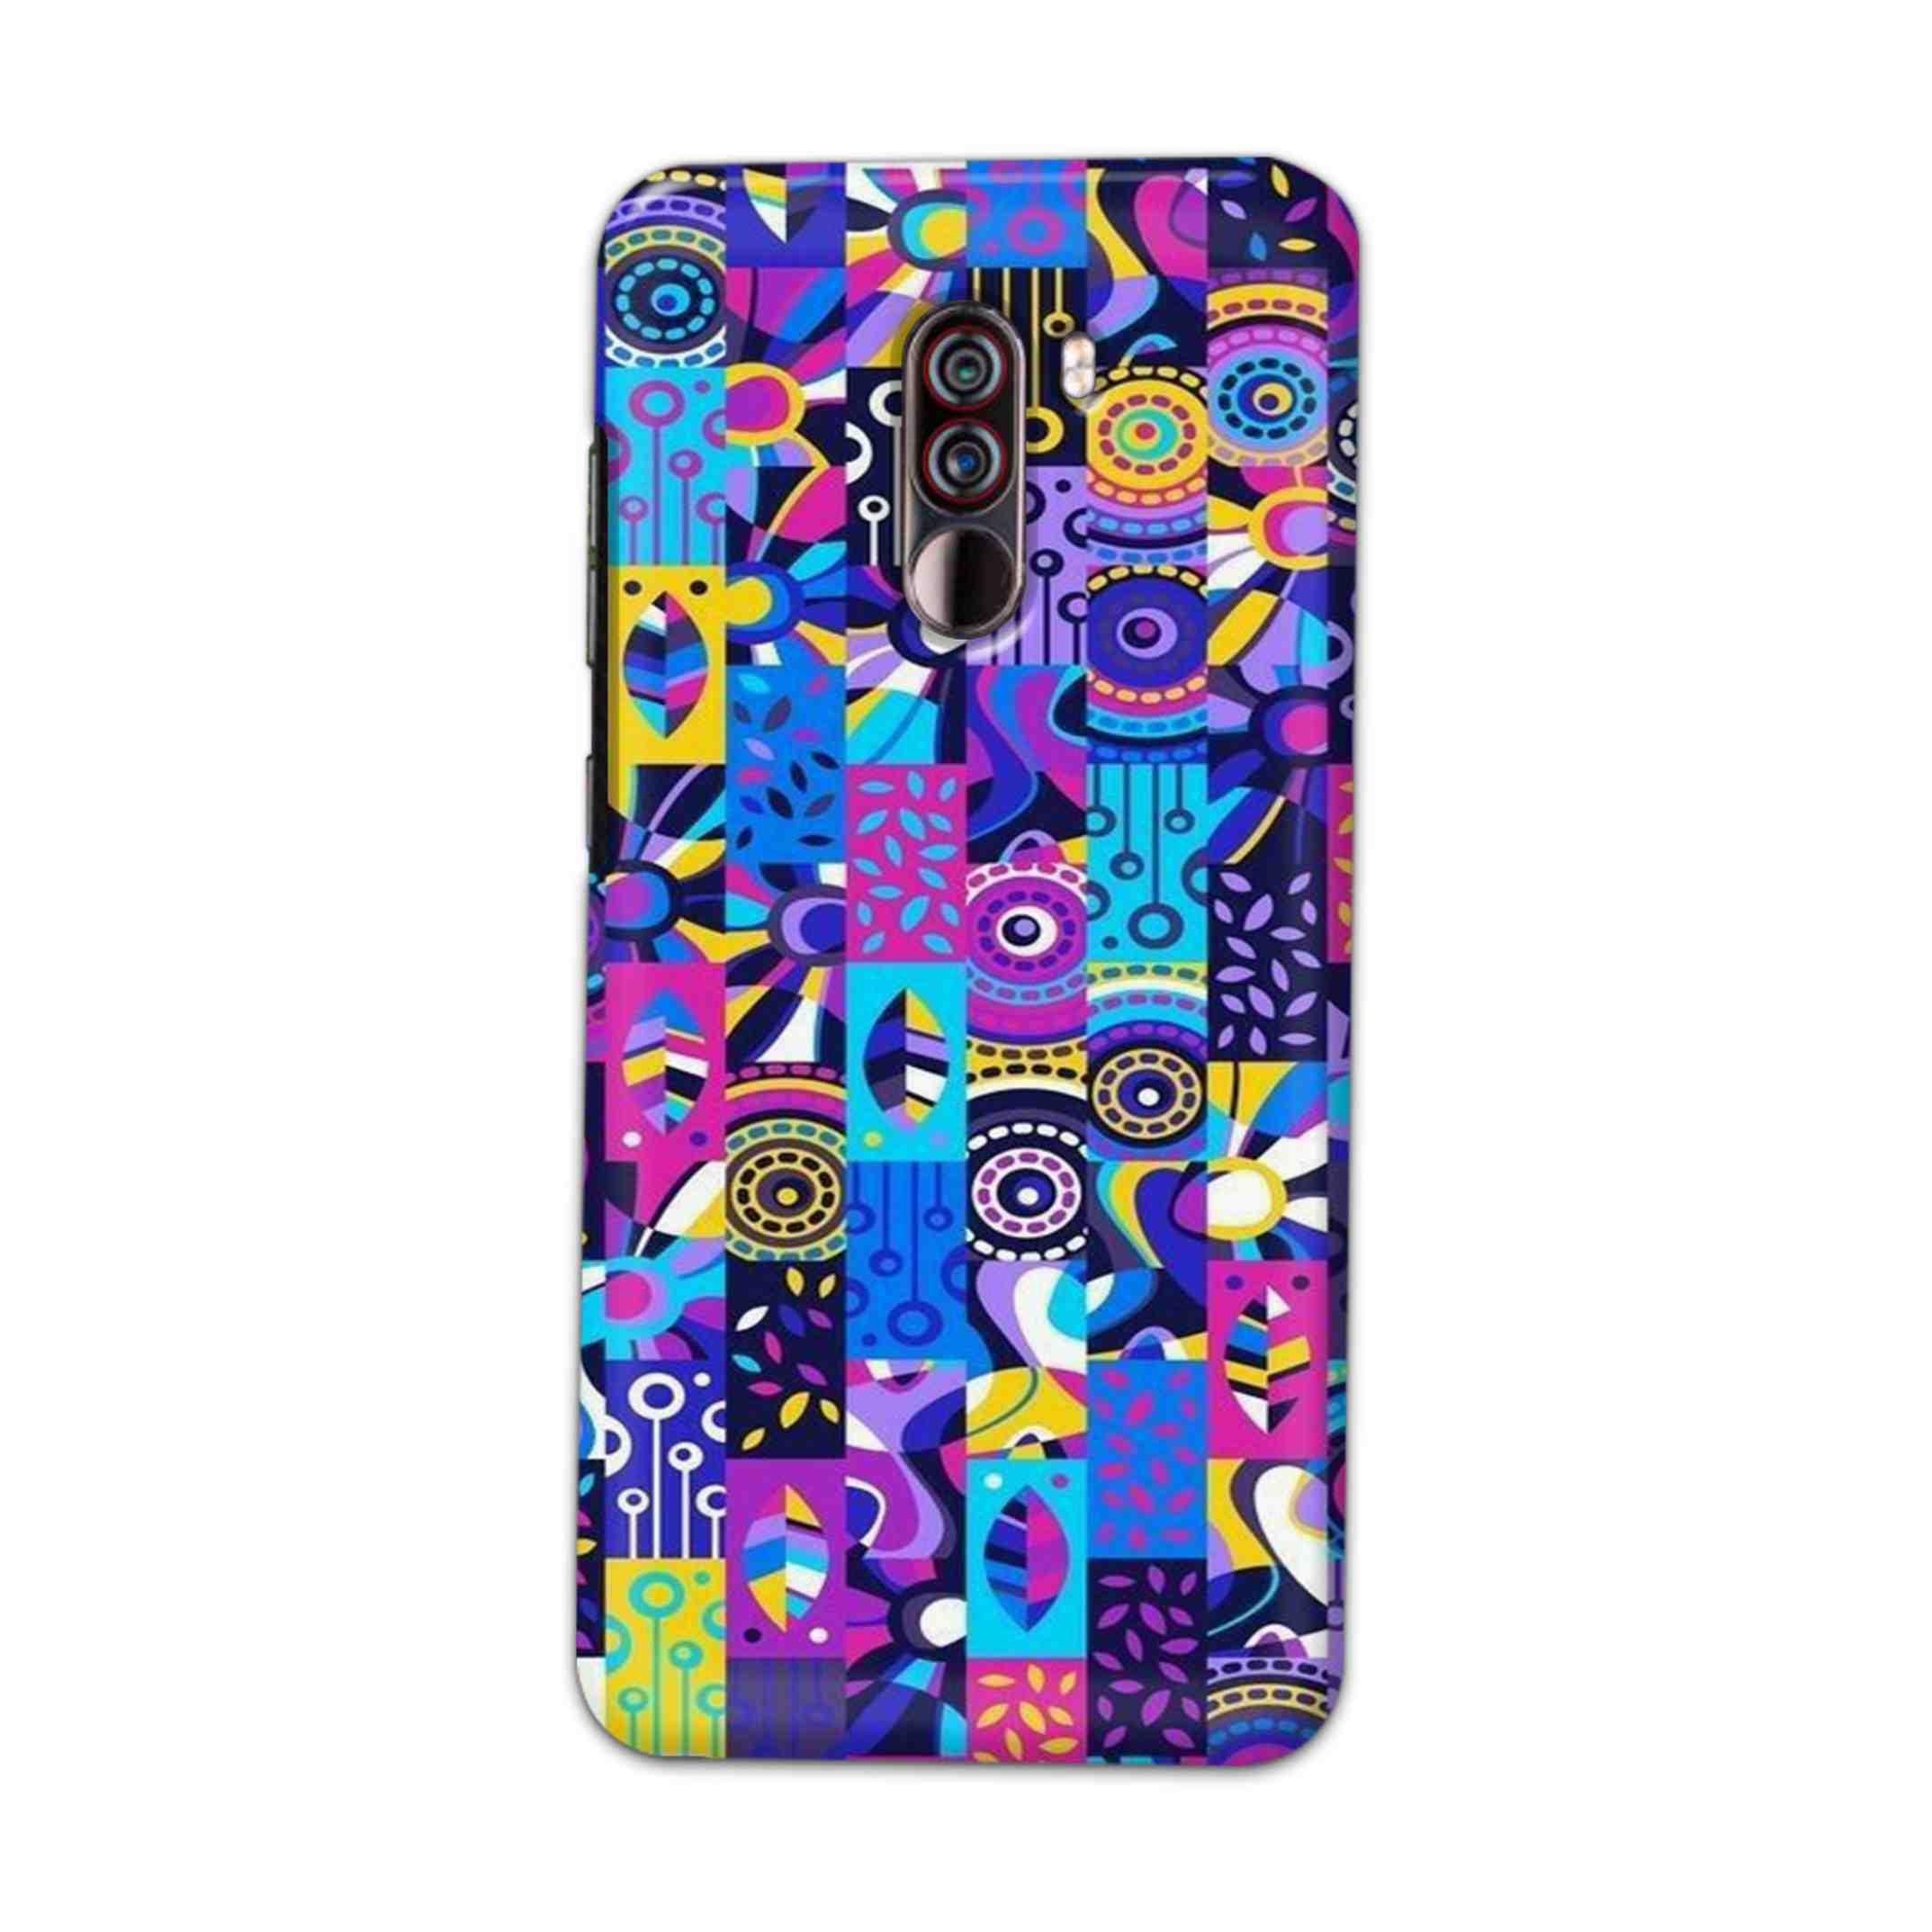 Buy Rainbow Art Hard Back Mobile Phone Case Cover For Xiaomi Pocophone F1 Online